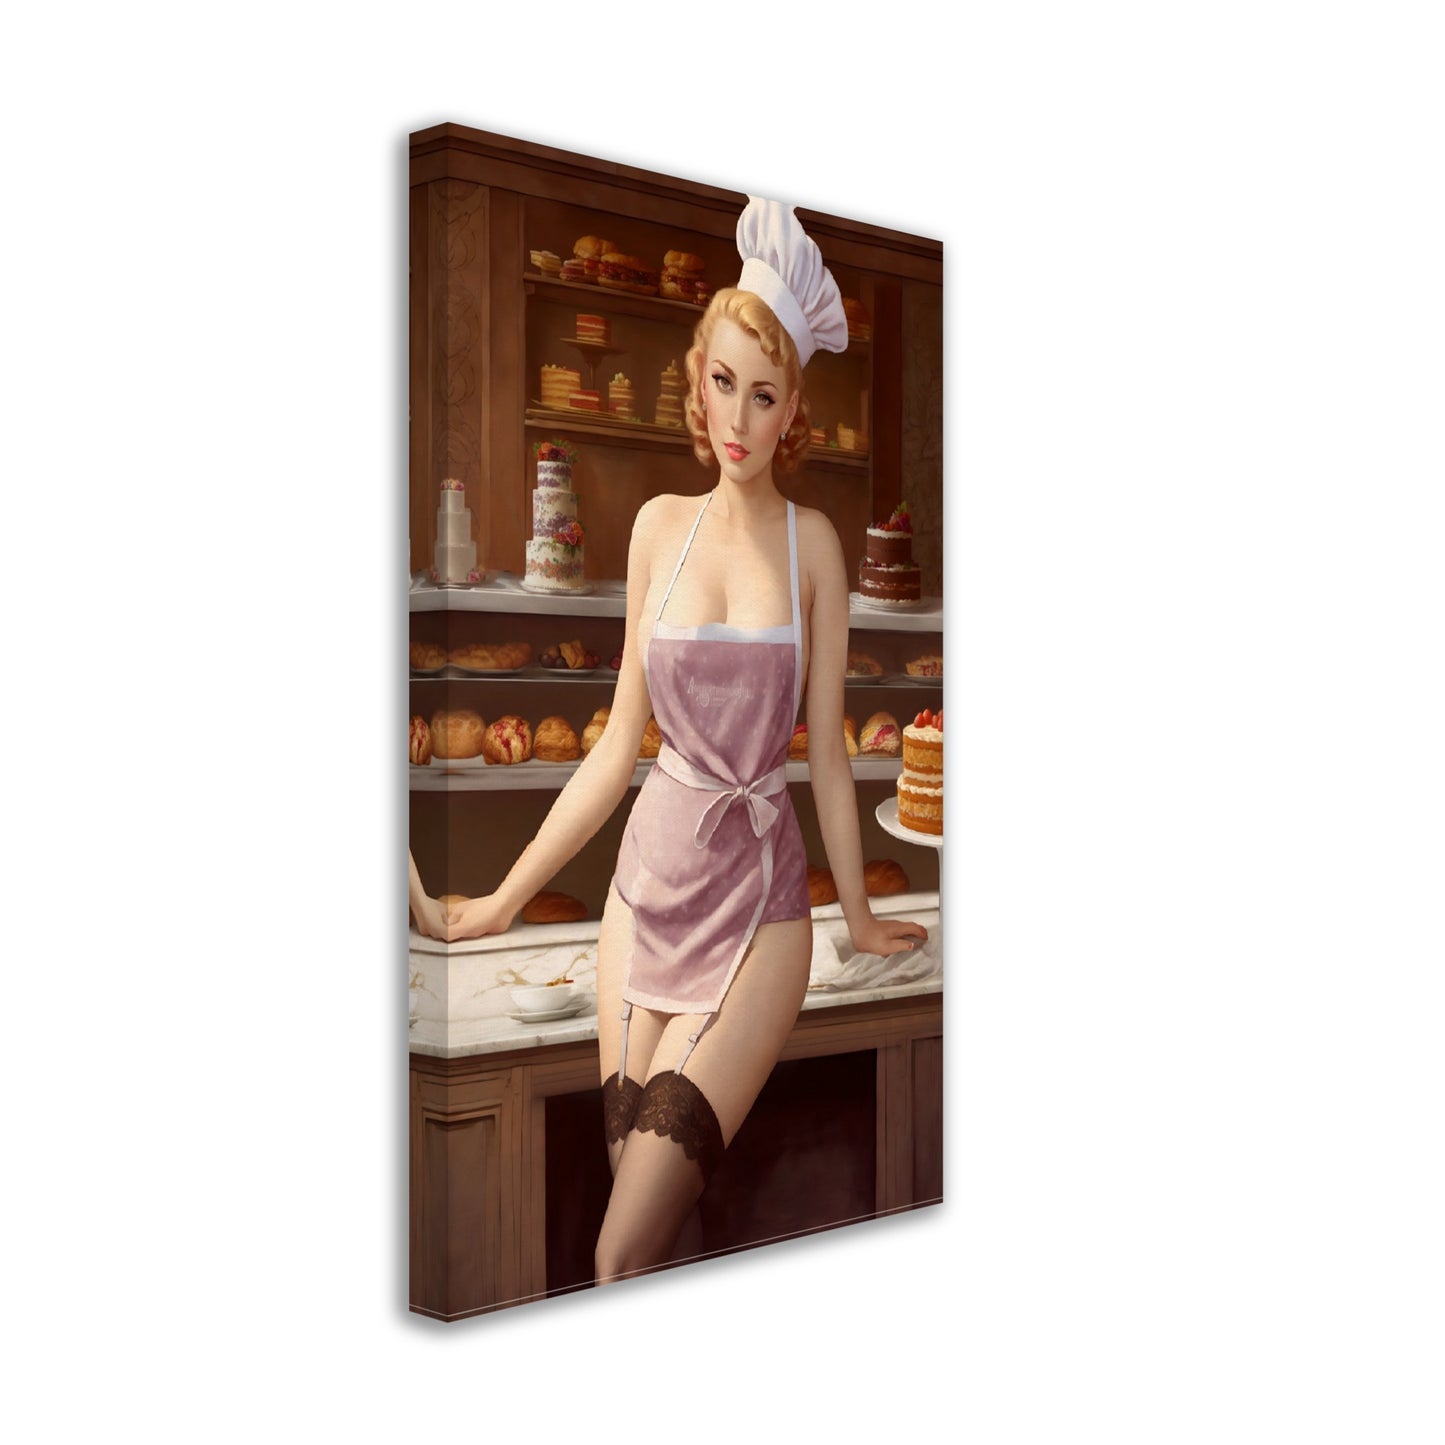 Daily Pinup #40 - Pastry Chef Wall Art